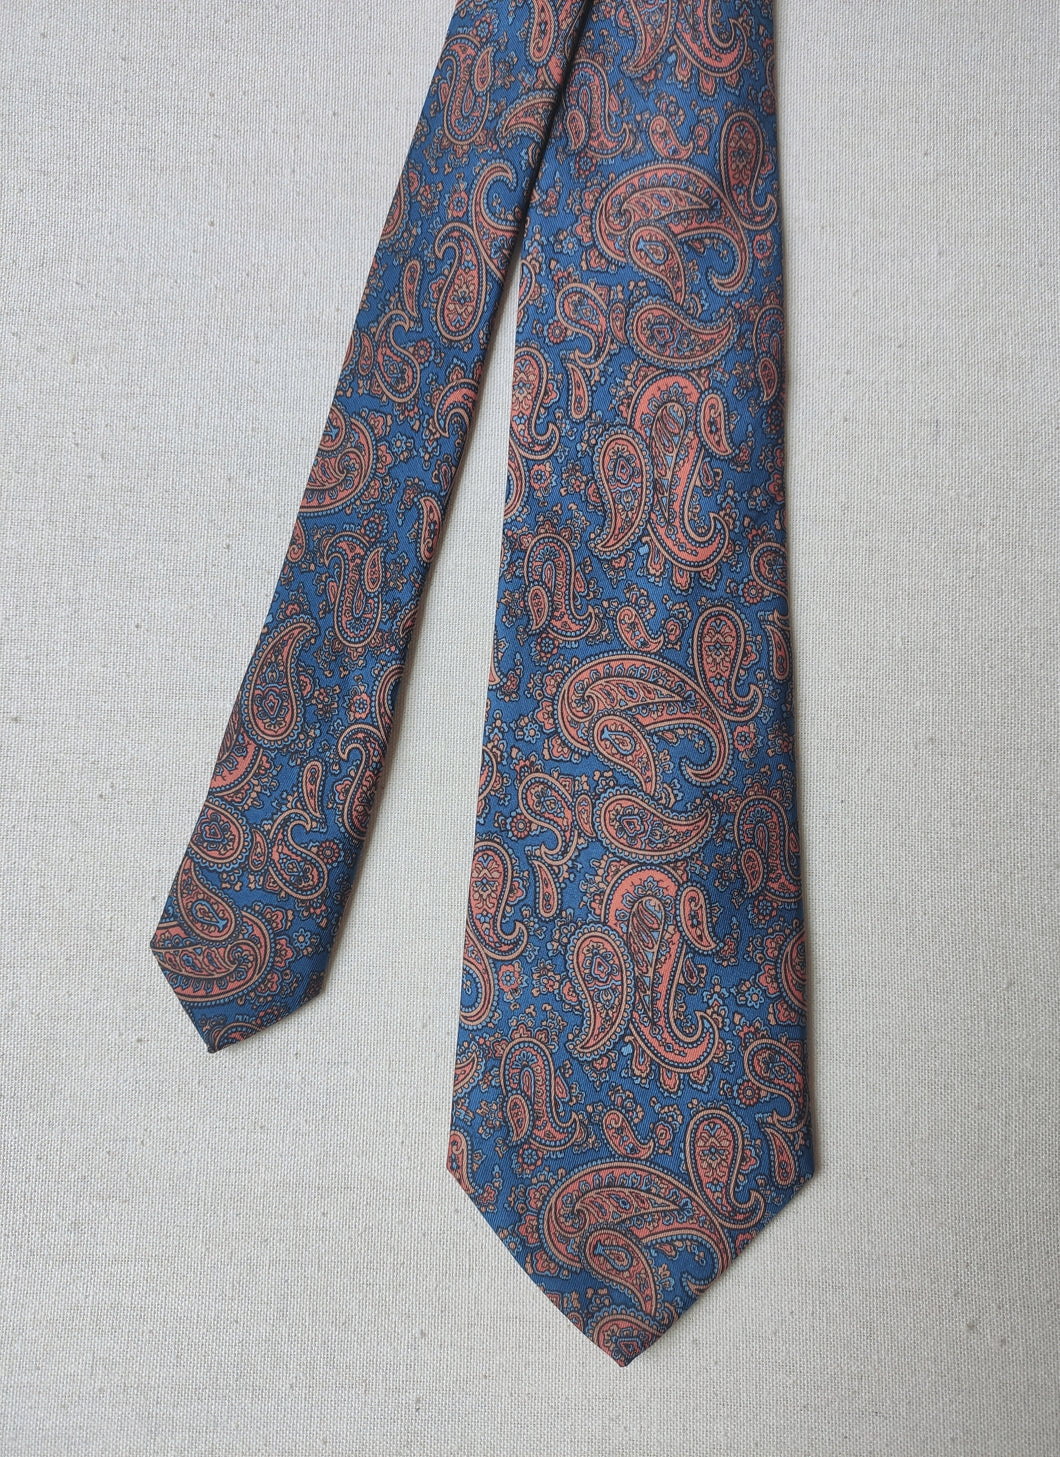 Mylord cravate vintage en pure soie à motif paisley Made in Italy